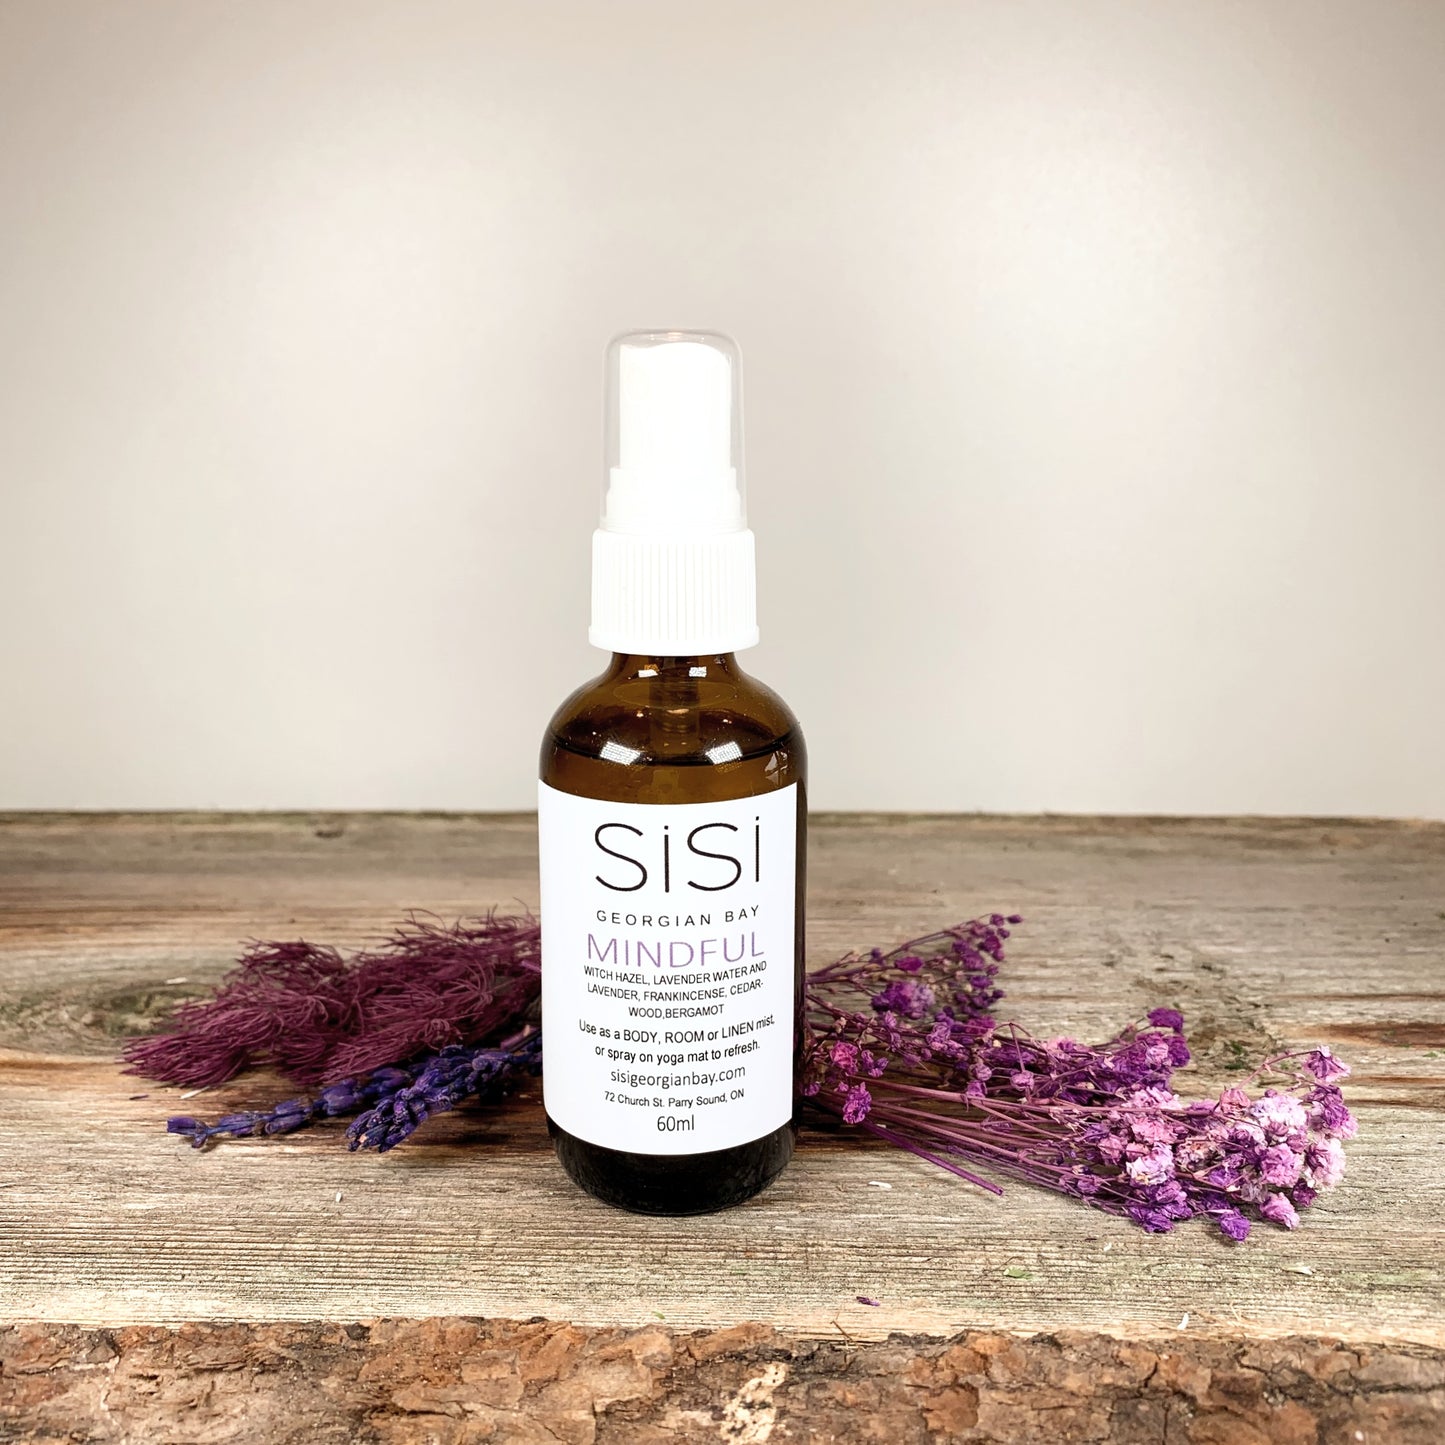 Aromatherapy Products - SiSi Georgian Bay Yoga Sprays in amber glass bottles on a rustic wooden live edge surface with flowers spread around the bottom